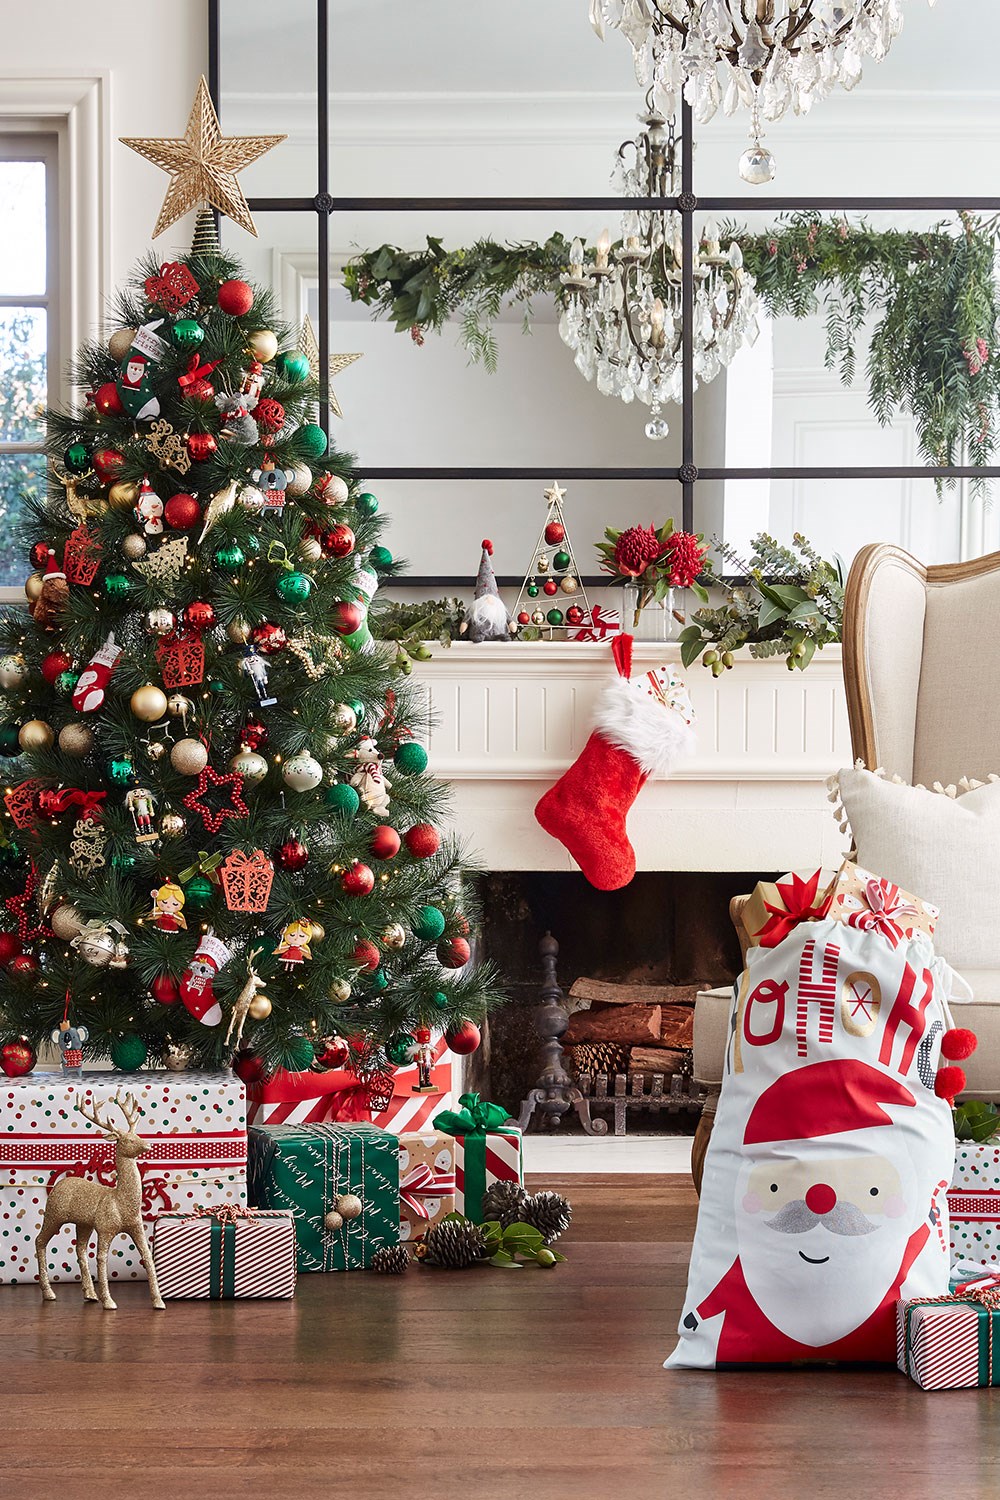 Target Christmas decorations revealed Our top picks Better Homes and